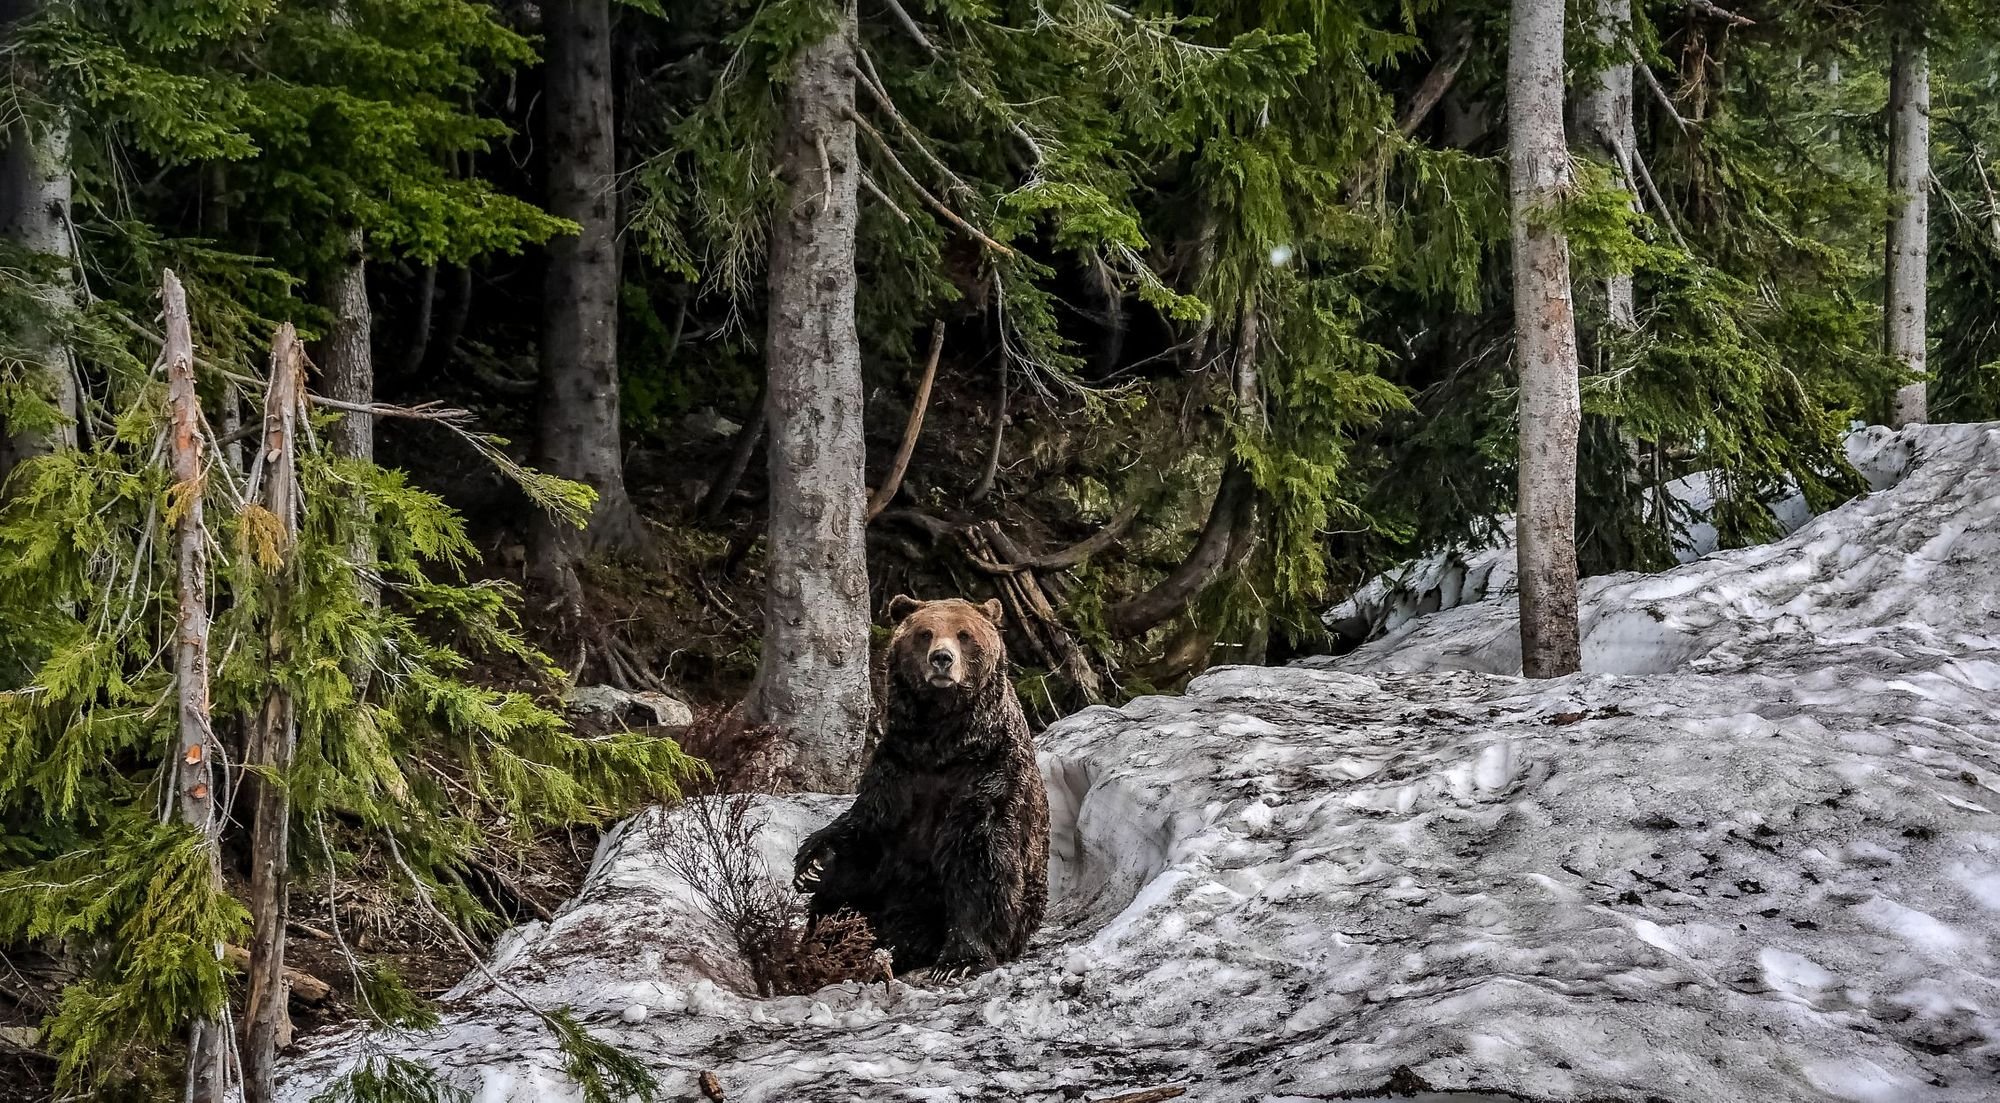 Both grizzly and black bears are commonly spotted around hiking trails in the Canadian Rockies. Photo: Getty